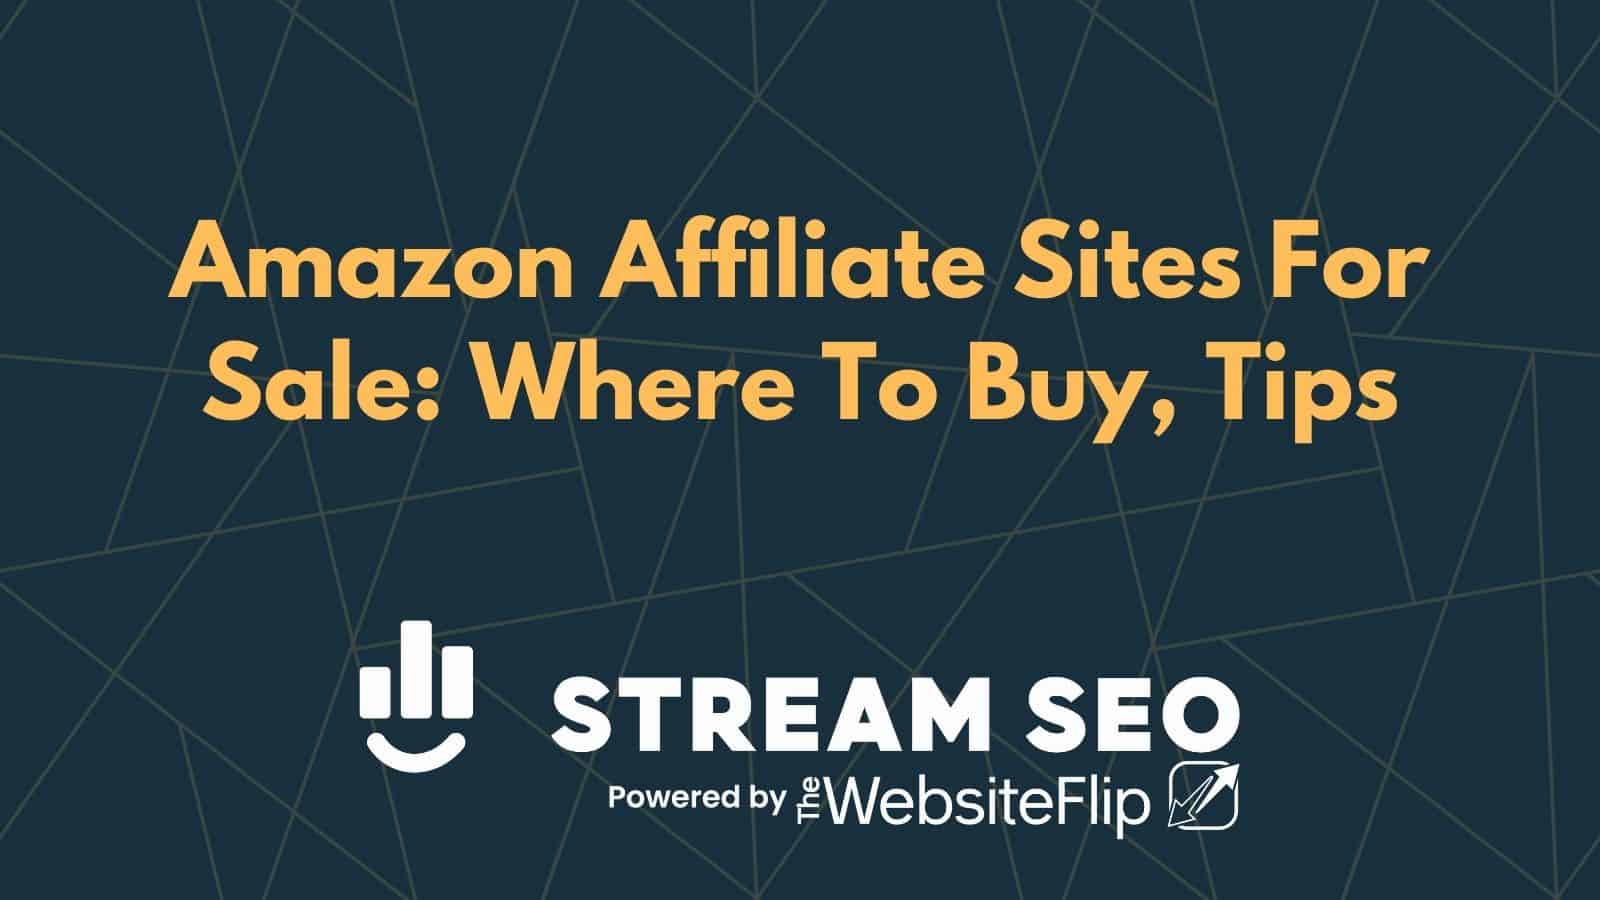 Finding Amazon Affiliate Sites For Sale